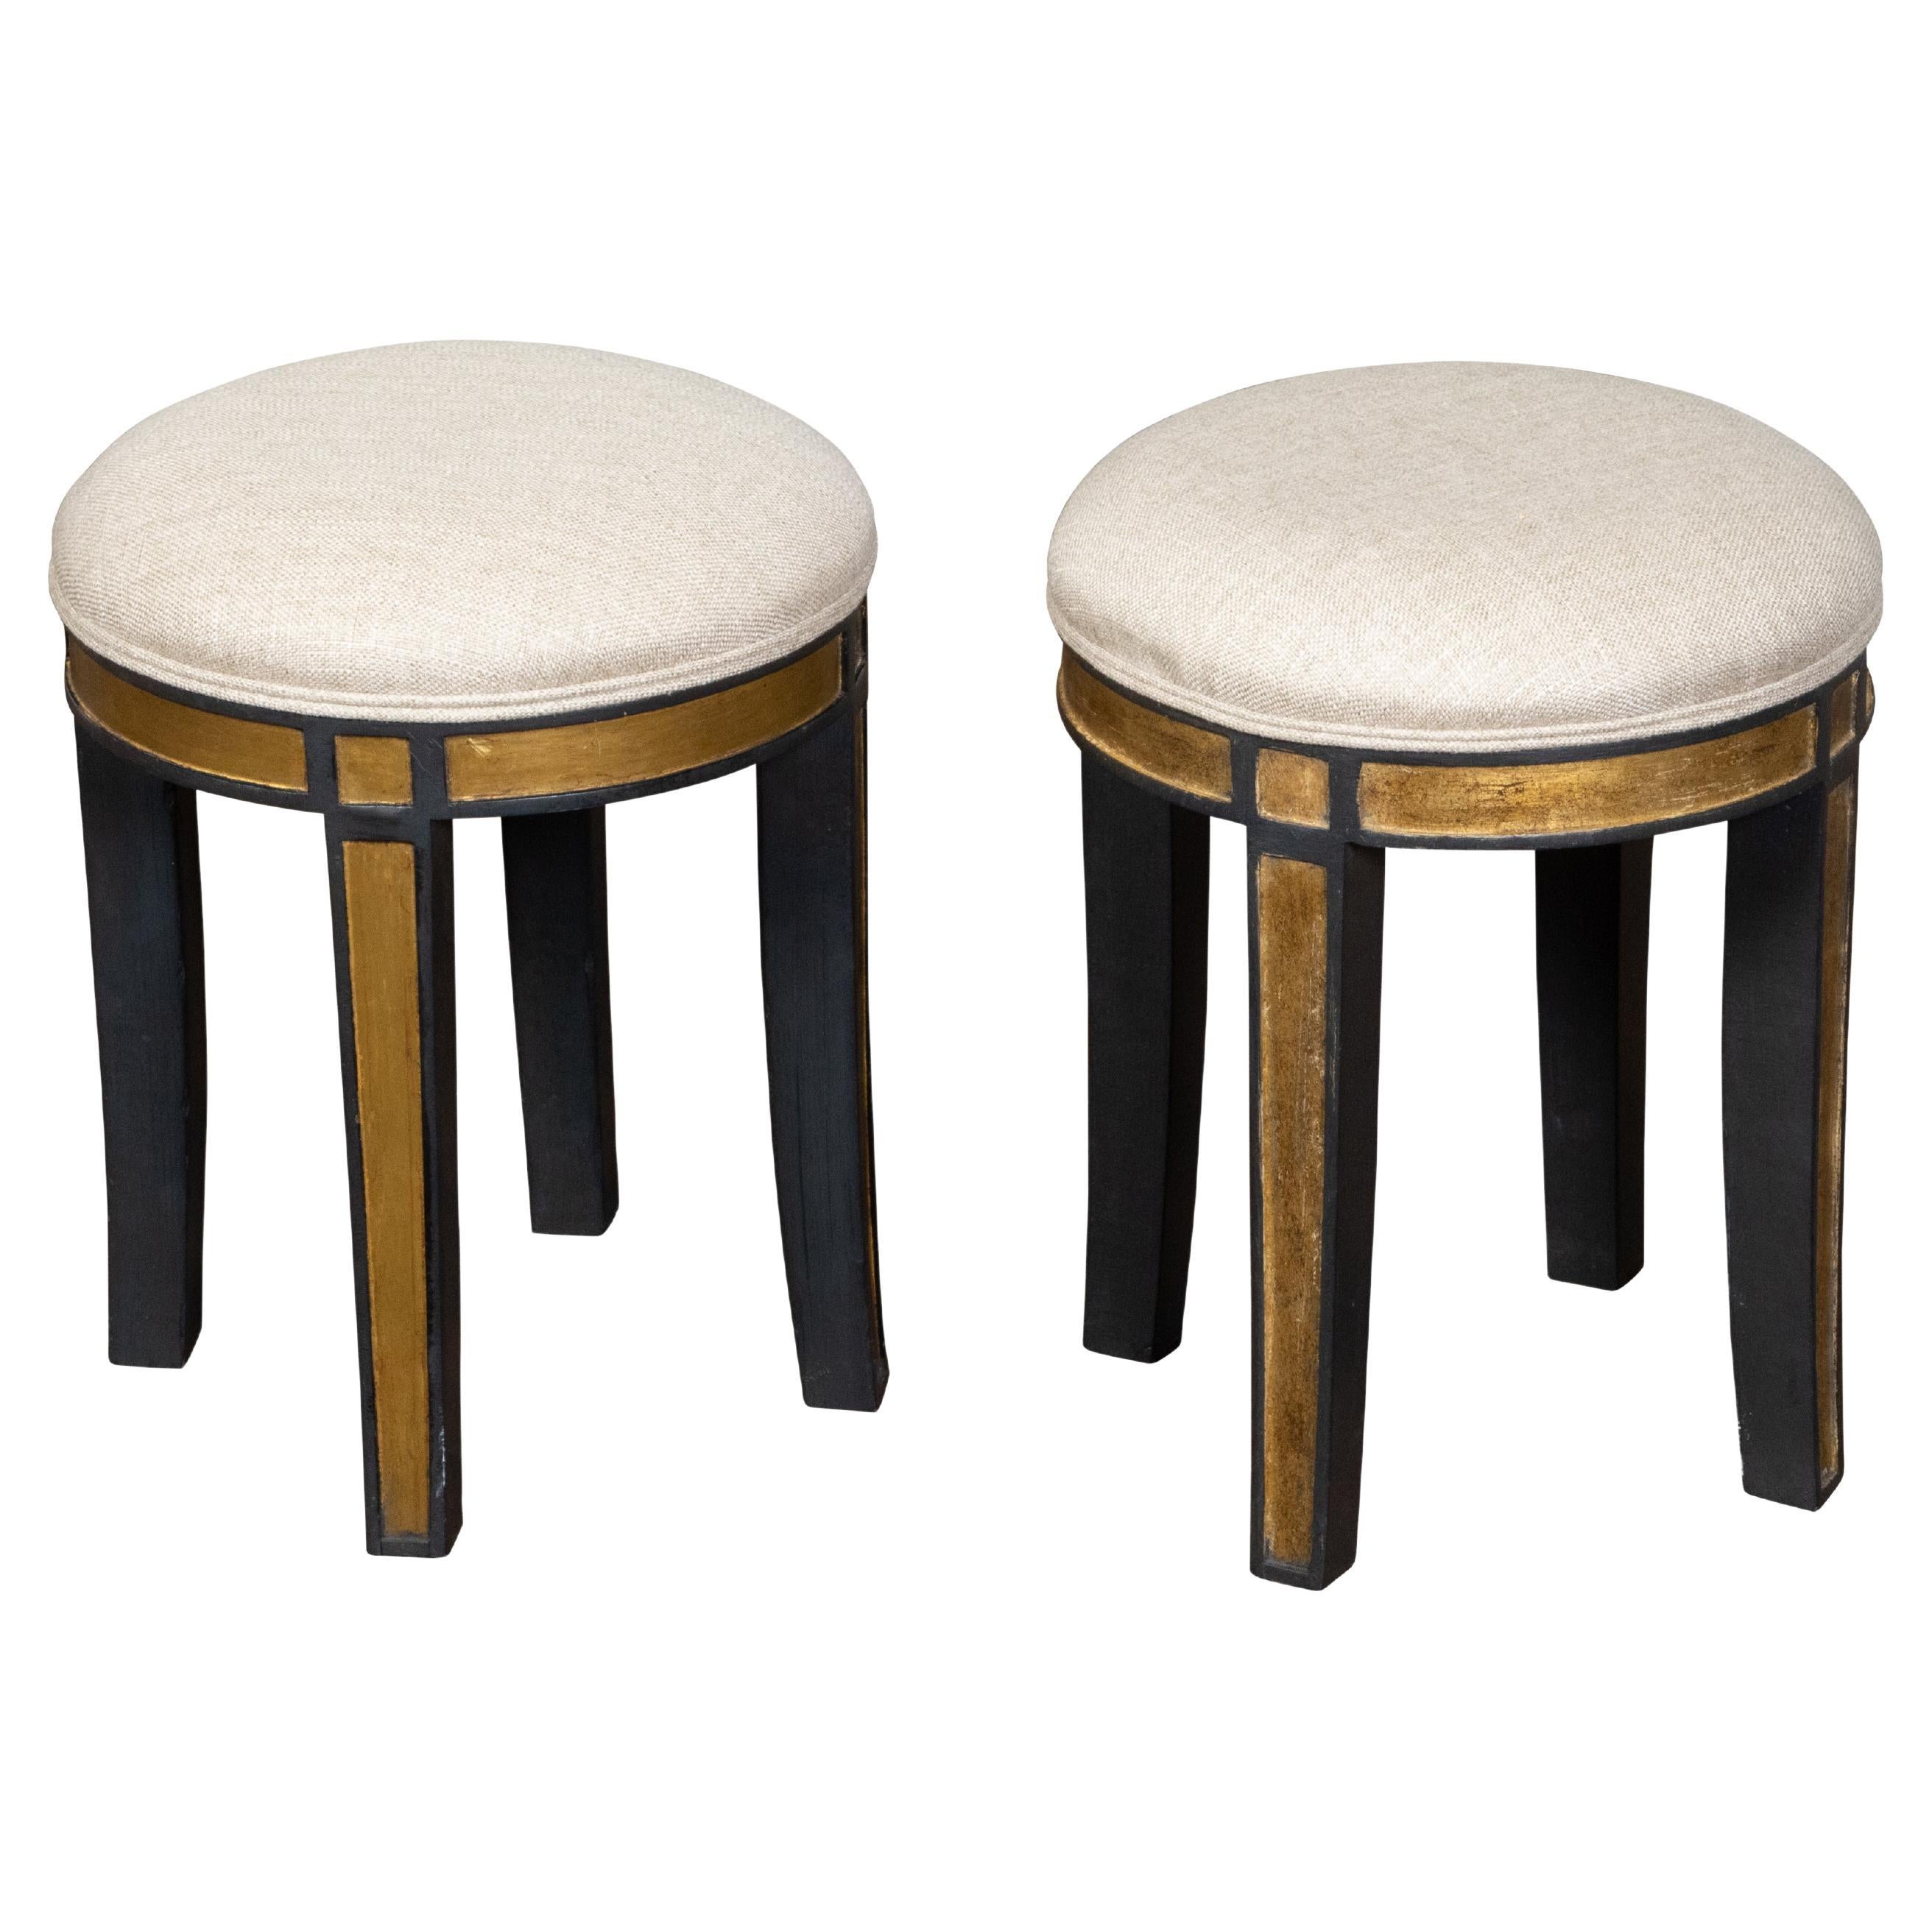 Pair of Midcentury Italian Upholstered Stools with Black and Gold Décor For Sale